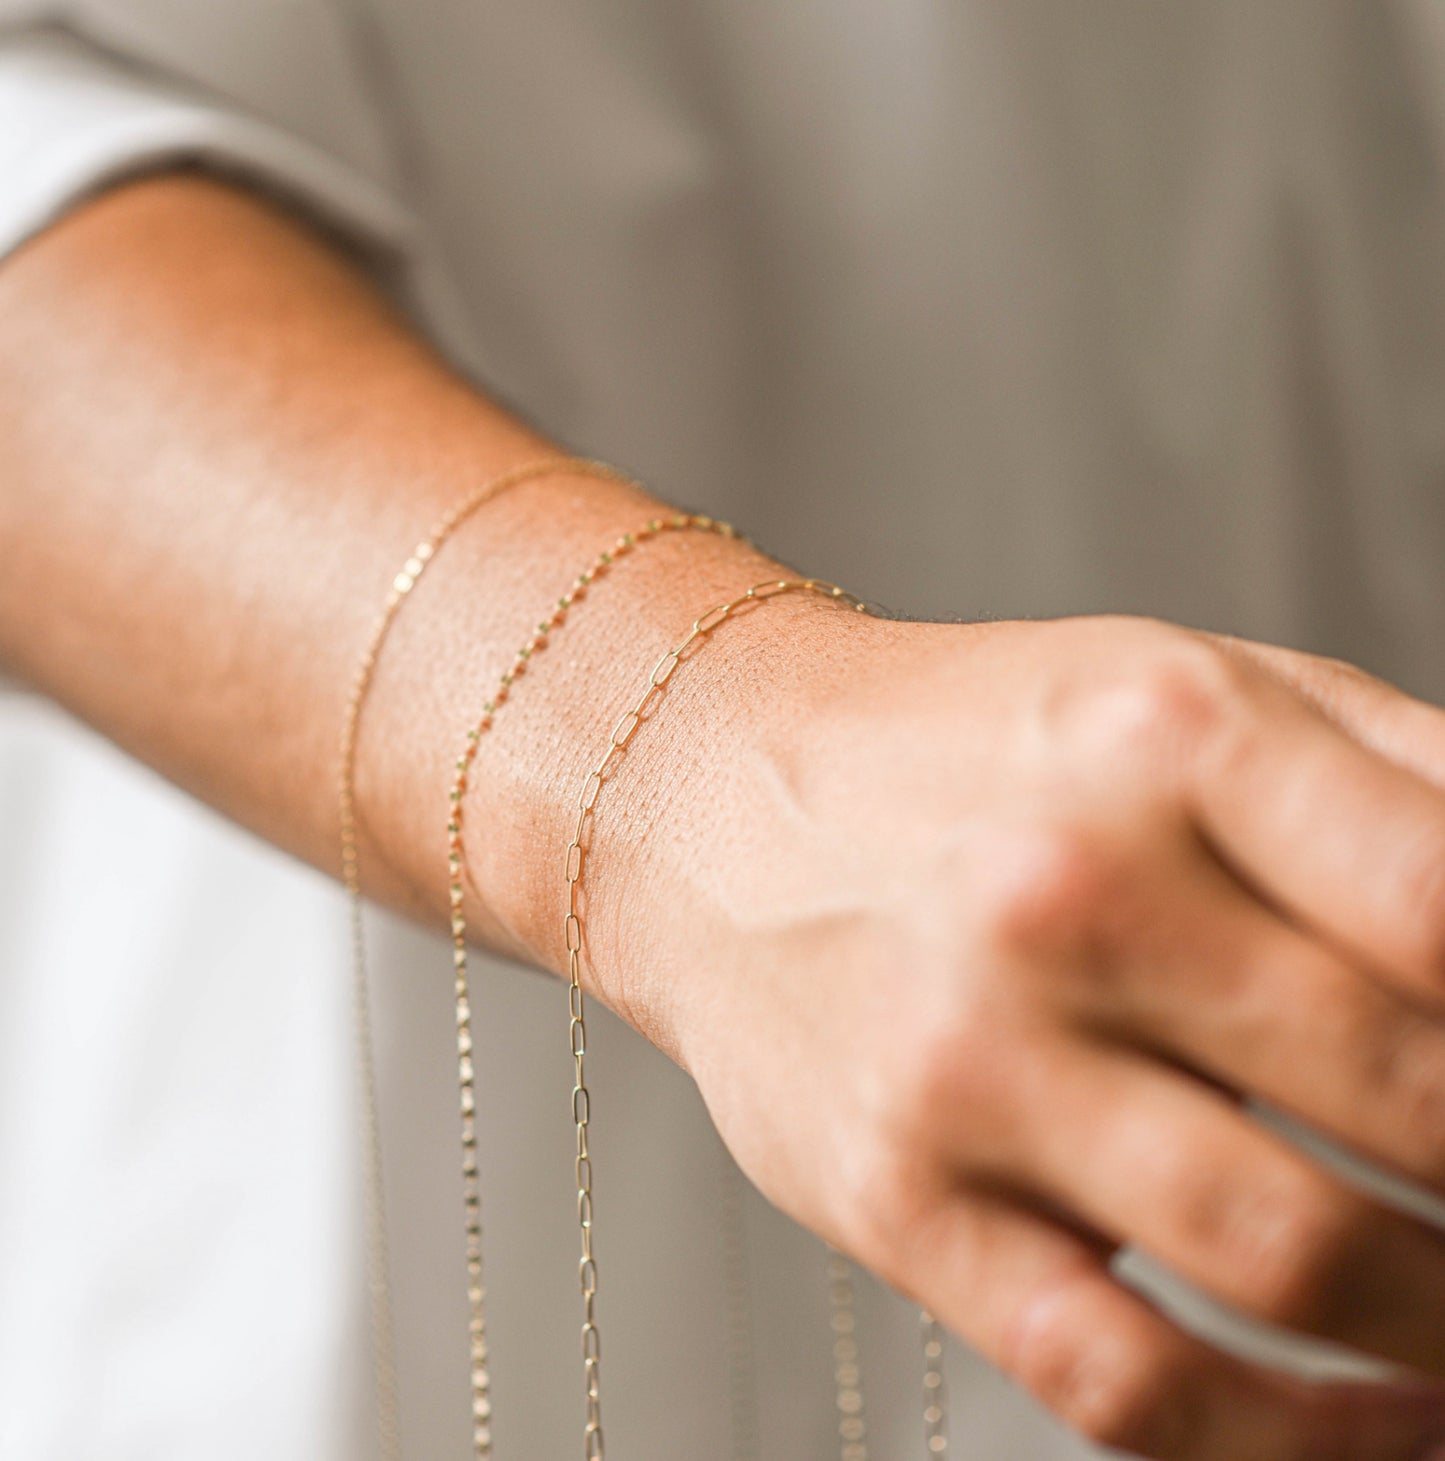 Hala Solid Gold Rolo Chain // RESERVATION  for IN-PERSON Permanent Jewelry